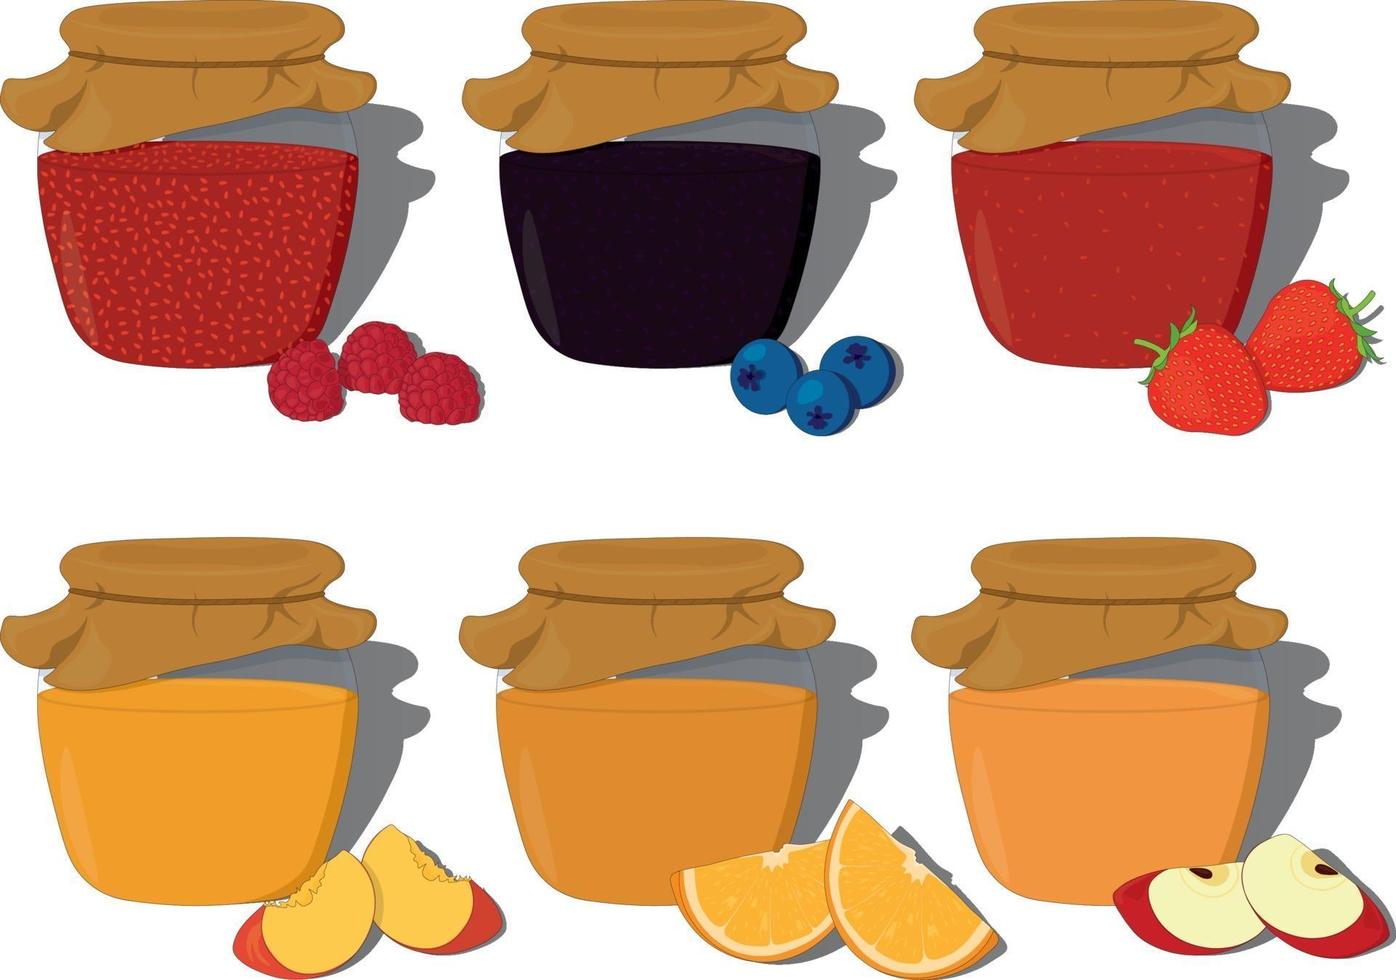 Fruit and berry jam jar collection vector illustration